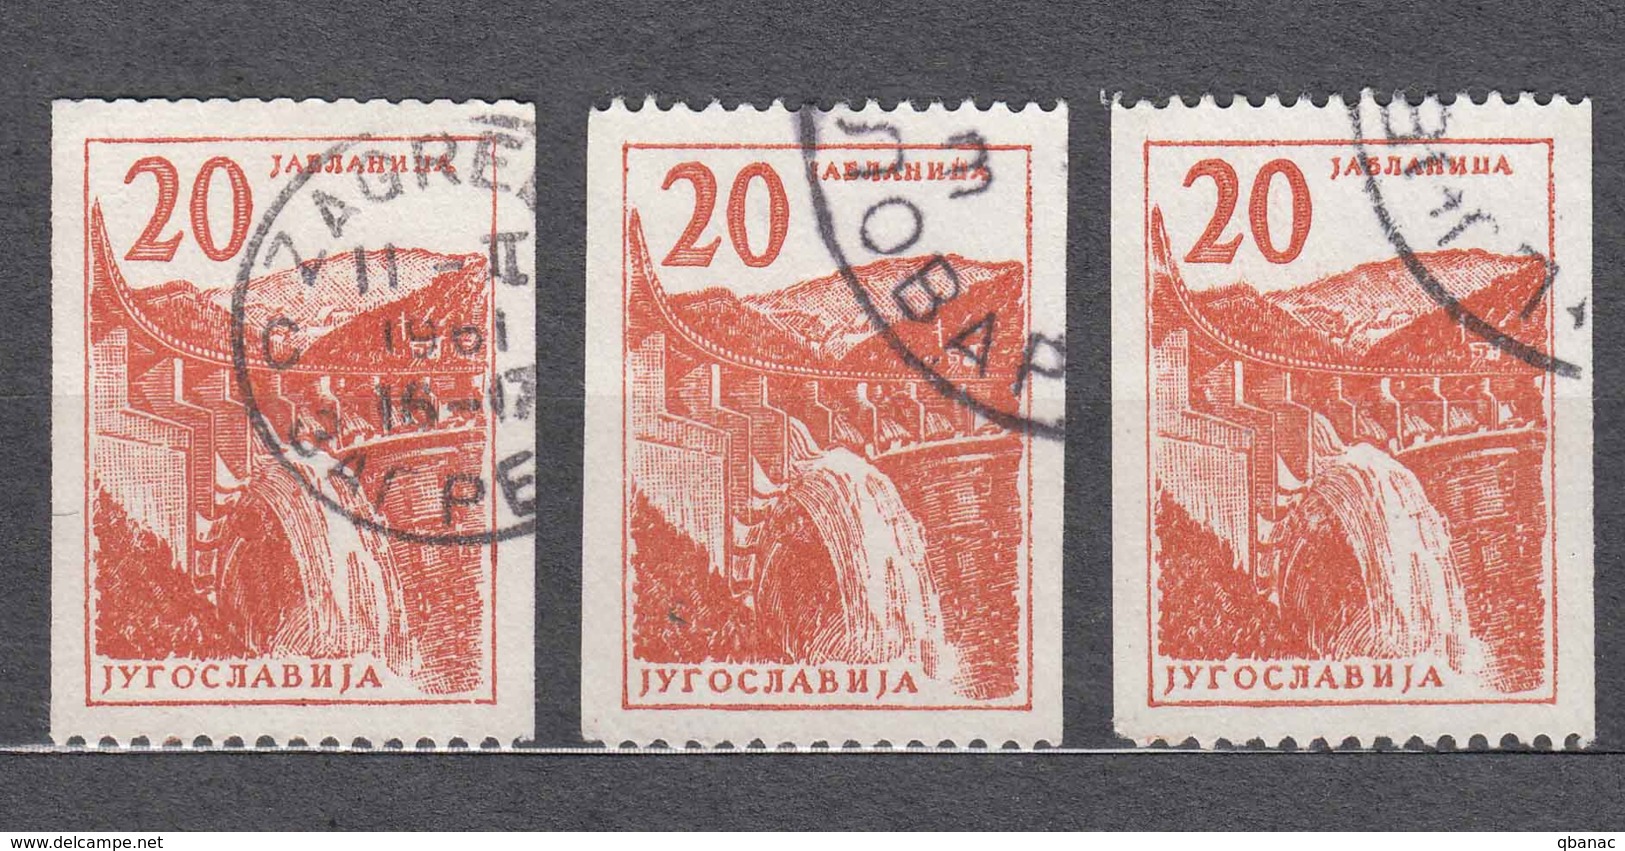 Yugoslavia Republic 1959 Stamps From Rollen Mi#899 Three Pieces Used - Used Stamps